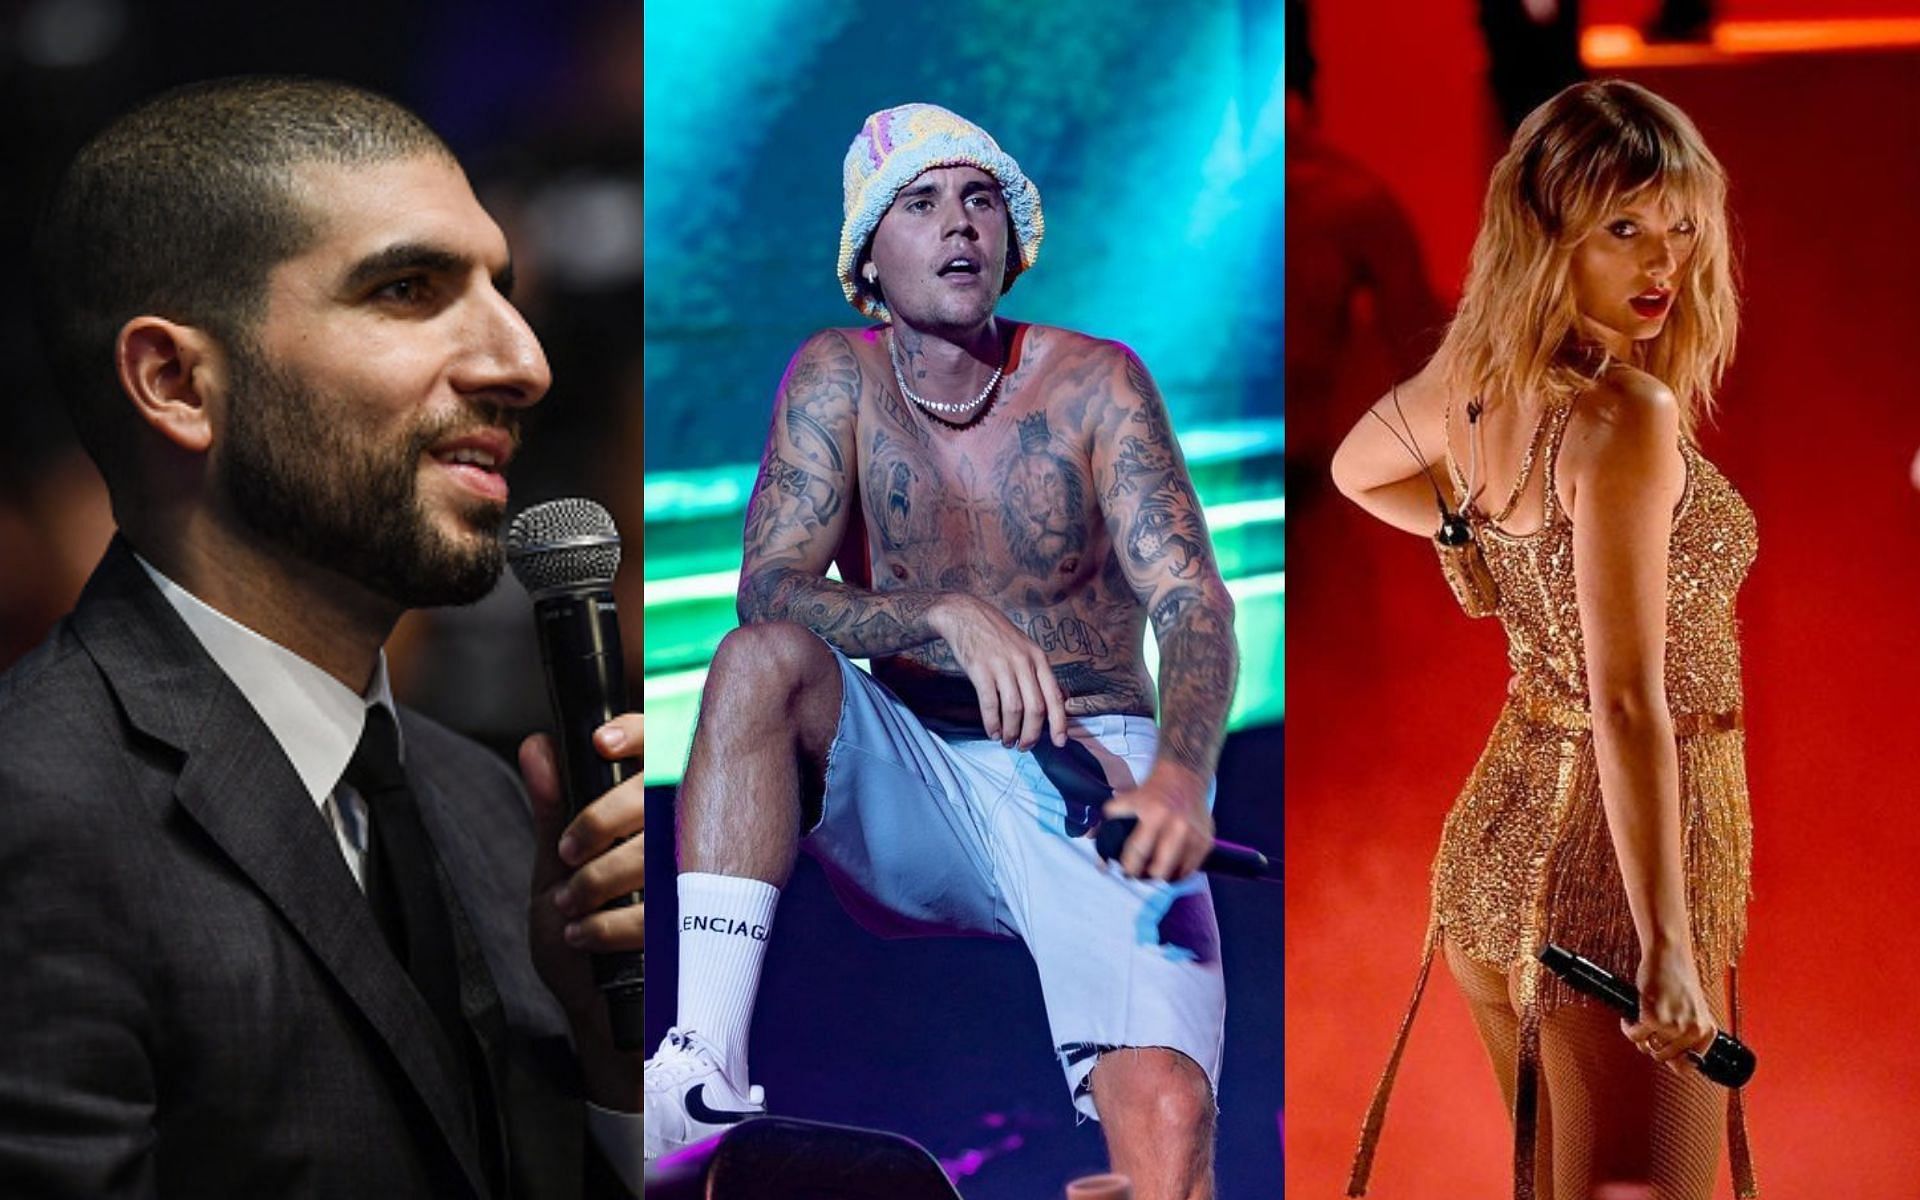 Ariel Helwani (left), Justin Bieber (center), Taylor Swift (right) [Images courtesy: Getty | @justinbieber and @taylorswift via Instagram]